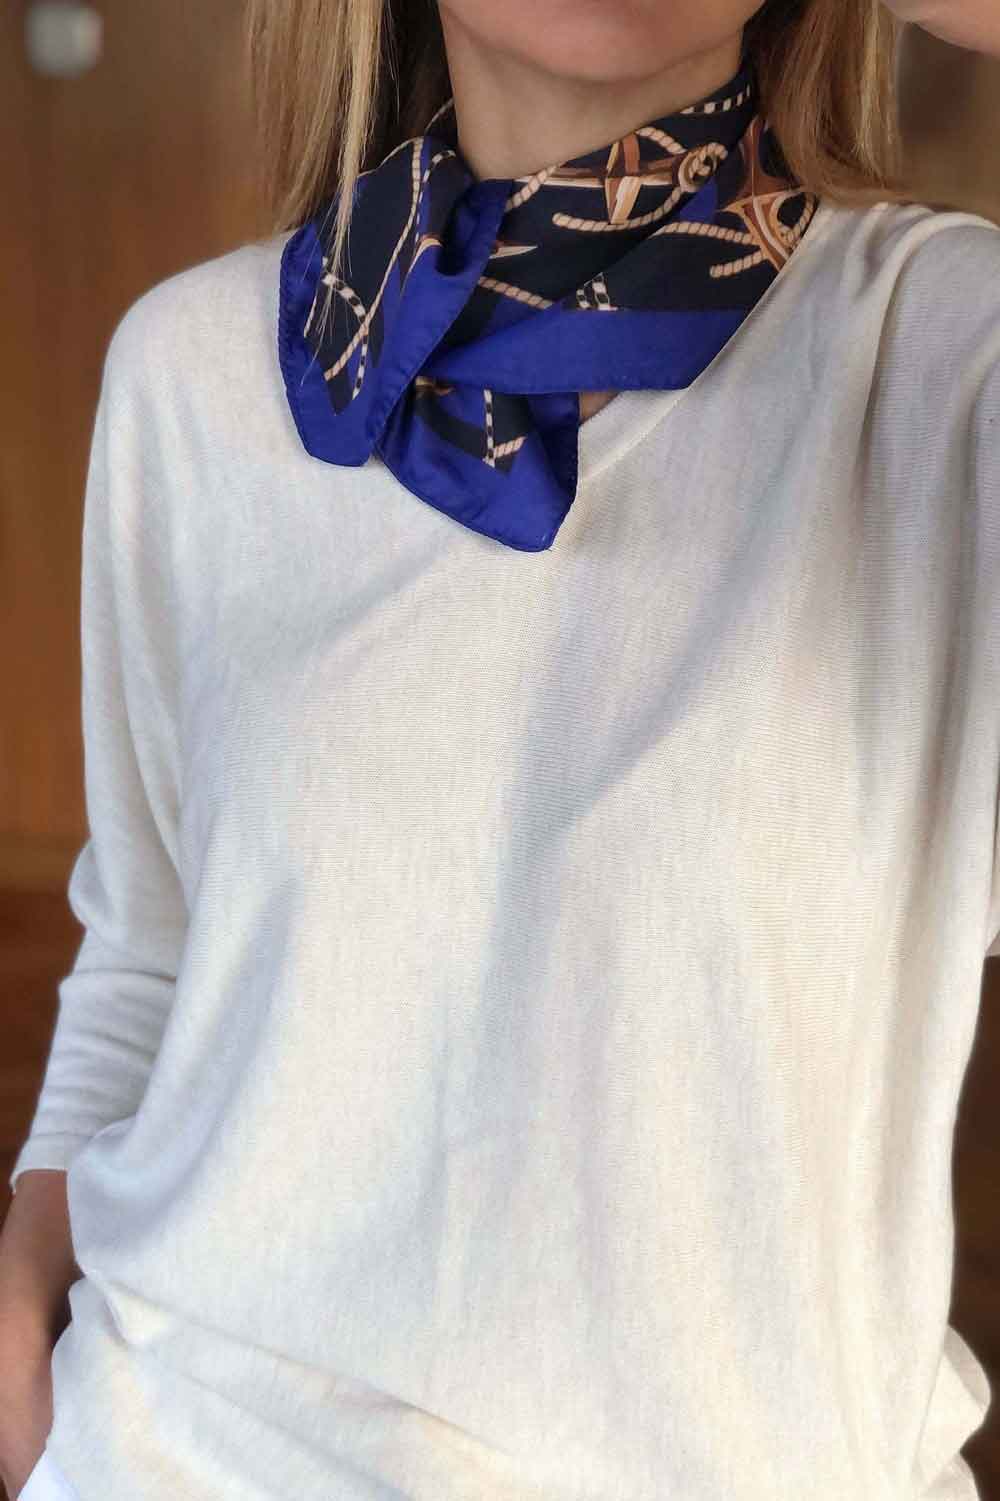 100% Satin Scarf, Spring Scarf, Gift for Women, Navy Blue Black Scarf, Head Scarf, Neck Scarf, Hair Scarf, Anchor Rope Pattern Silky Scarf